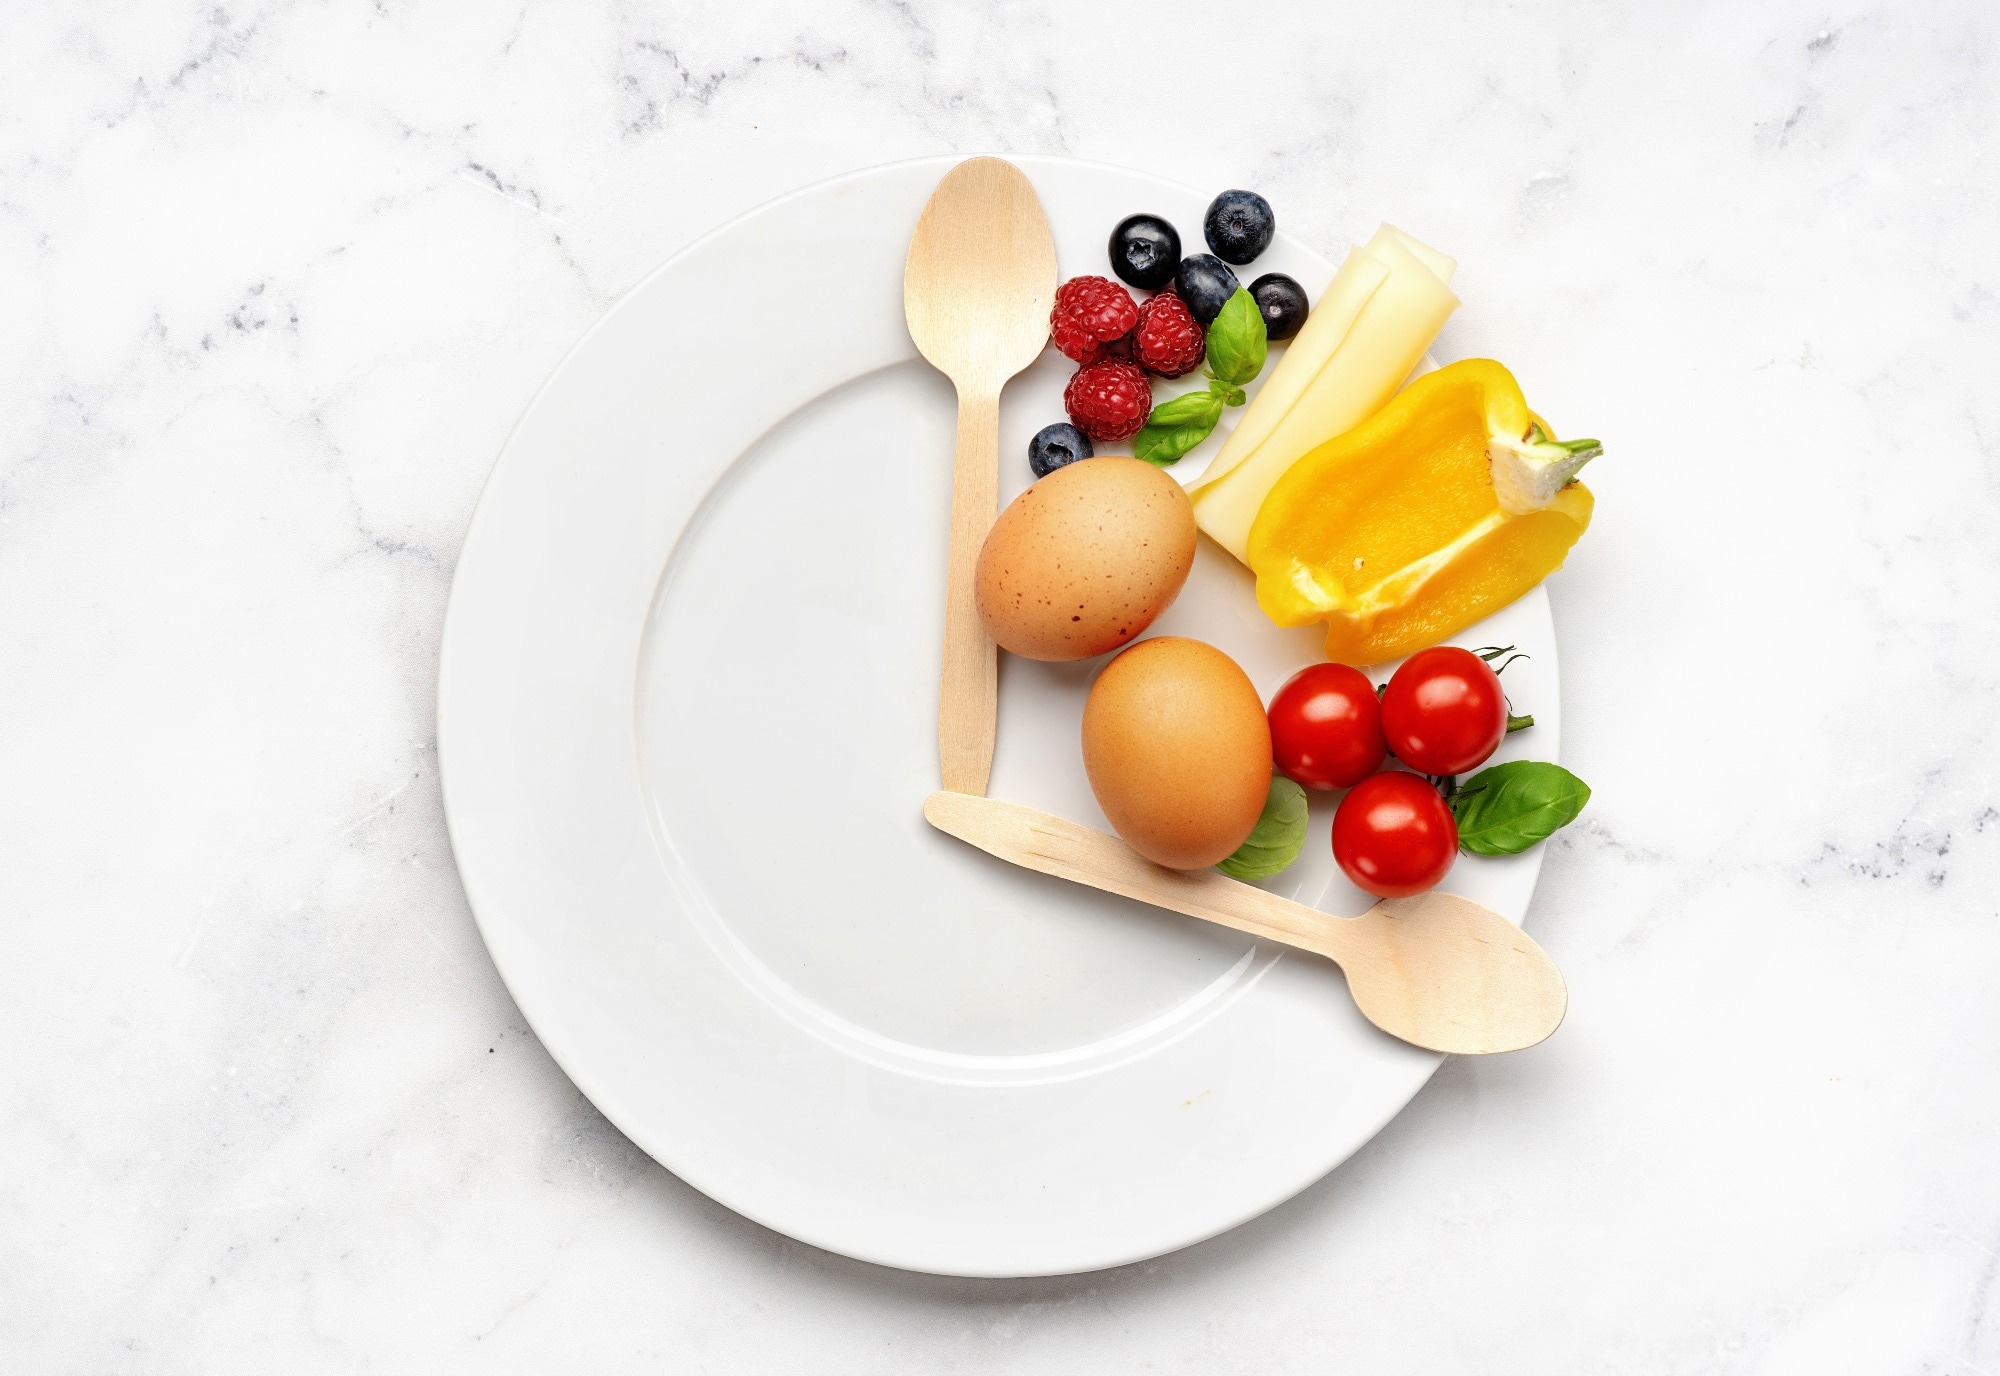 Accepted manuscript: Intermittent Fasting and Bone Health: A Bone of Contention? Image Credit: Kattecat / Shutterstock